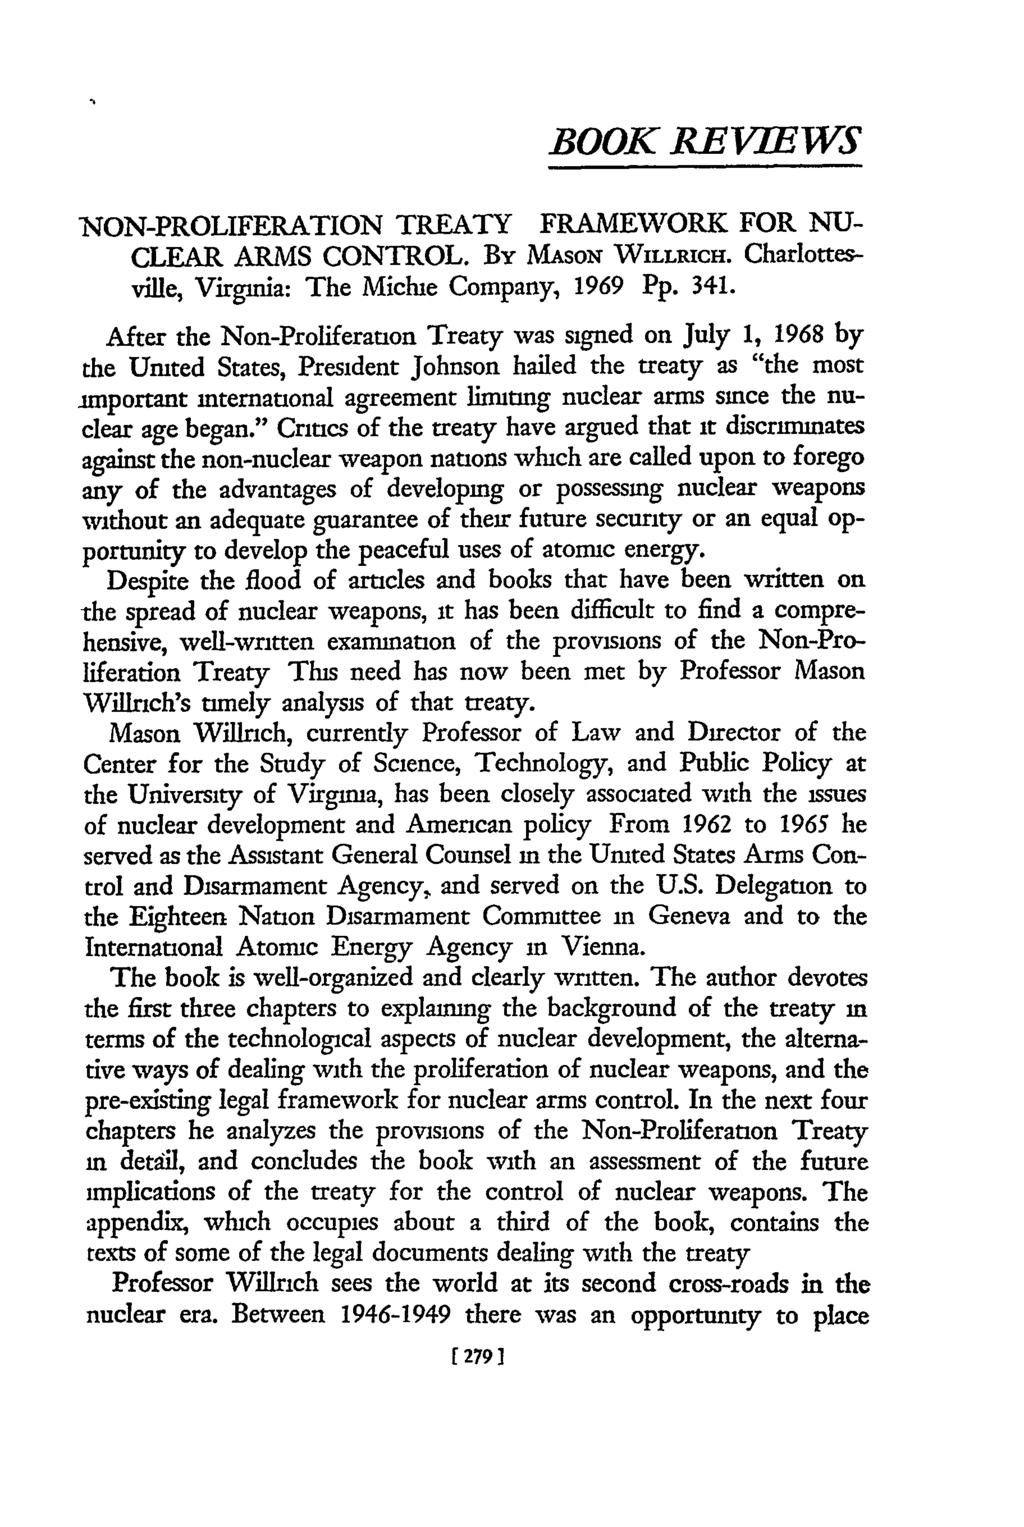 BOOK REVIEWS NON-PROLIFERATION TREATY FRAMEWfORK FOR NU- CLEAR ARMS CONTROL. By MASON WILLRICH. Charlottesville, Virginia: The Michie Company, 1969 Pp. 341.